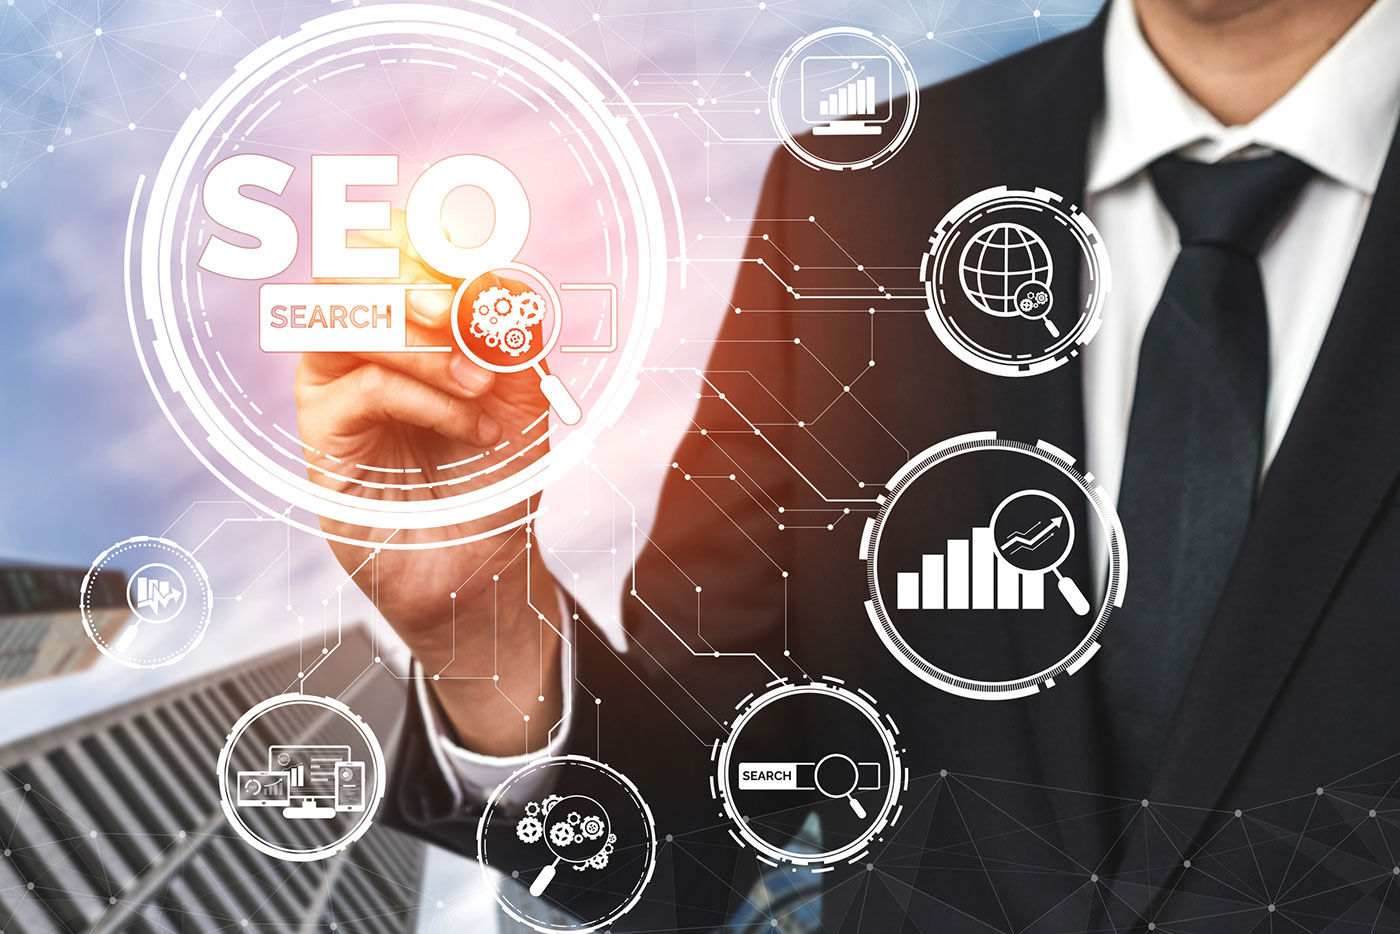 How to become an seo expert